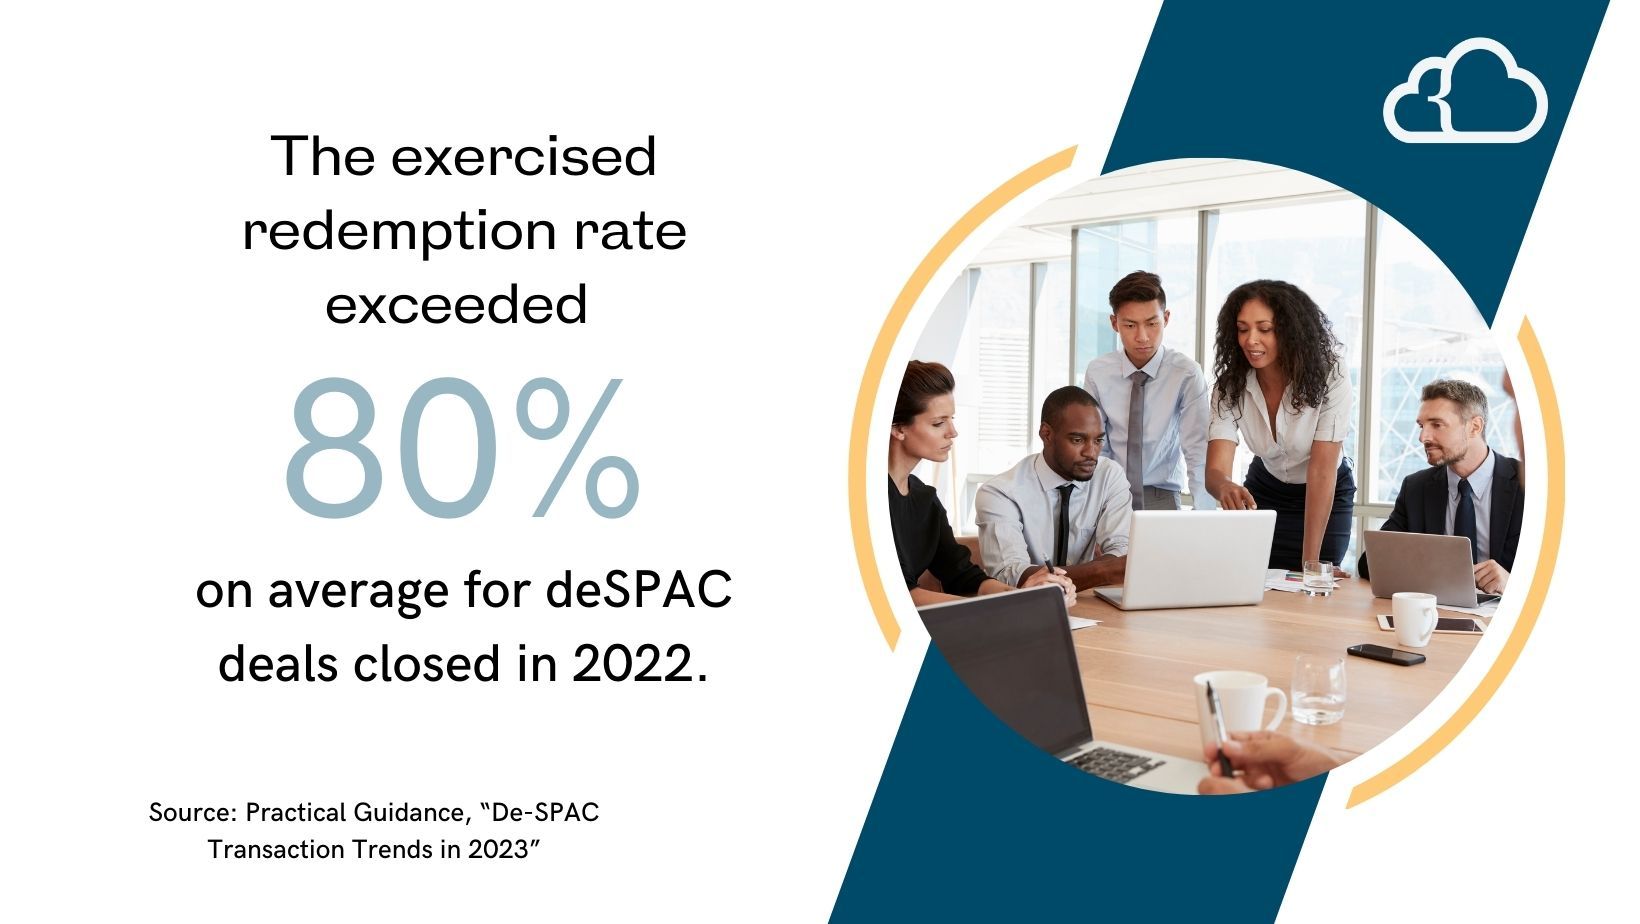 Graphic explaining that the exercised redemption rate exceeded 80% on average for deSPAC deals closed in 2022. 